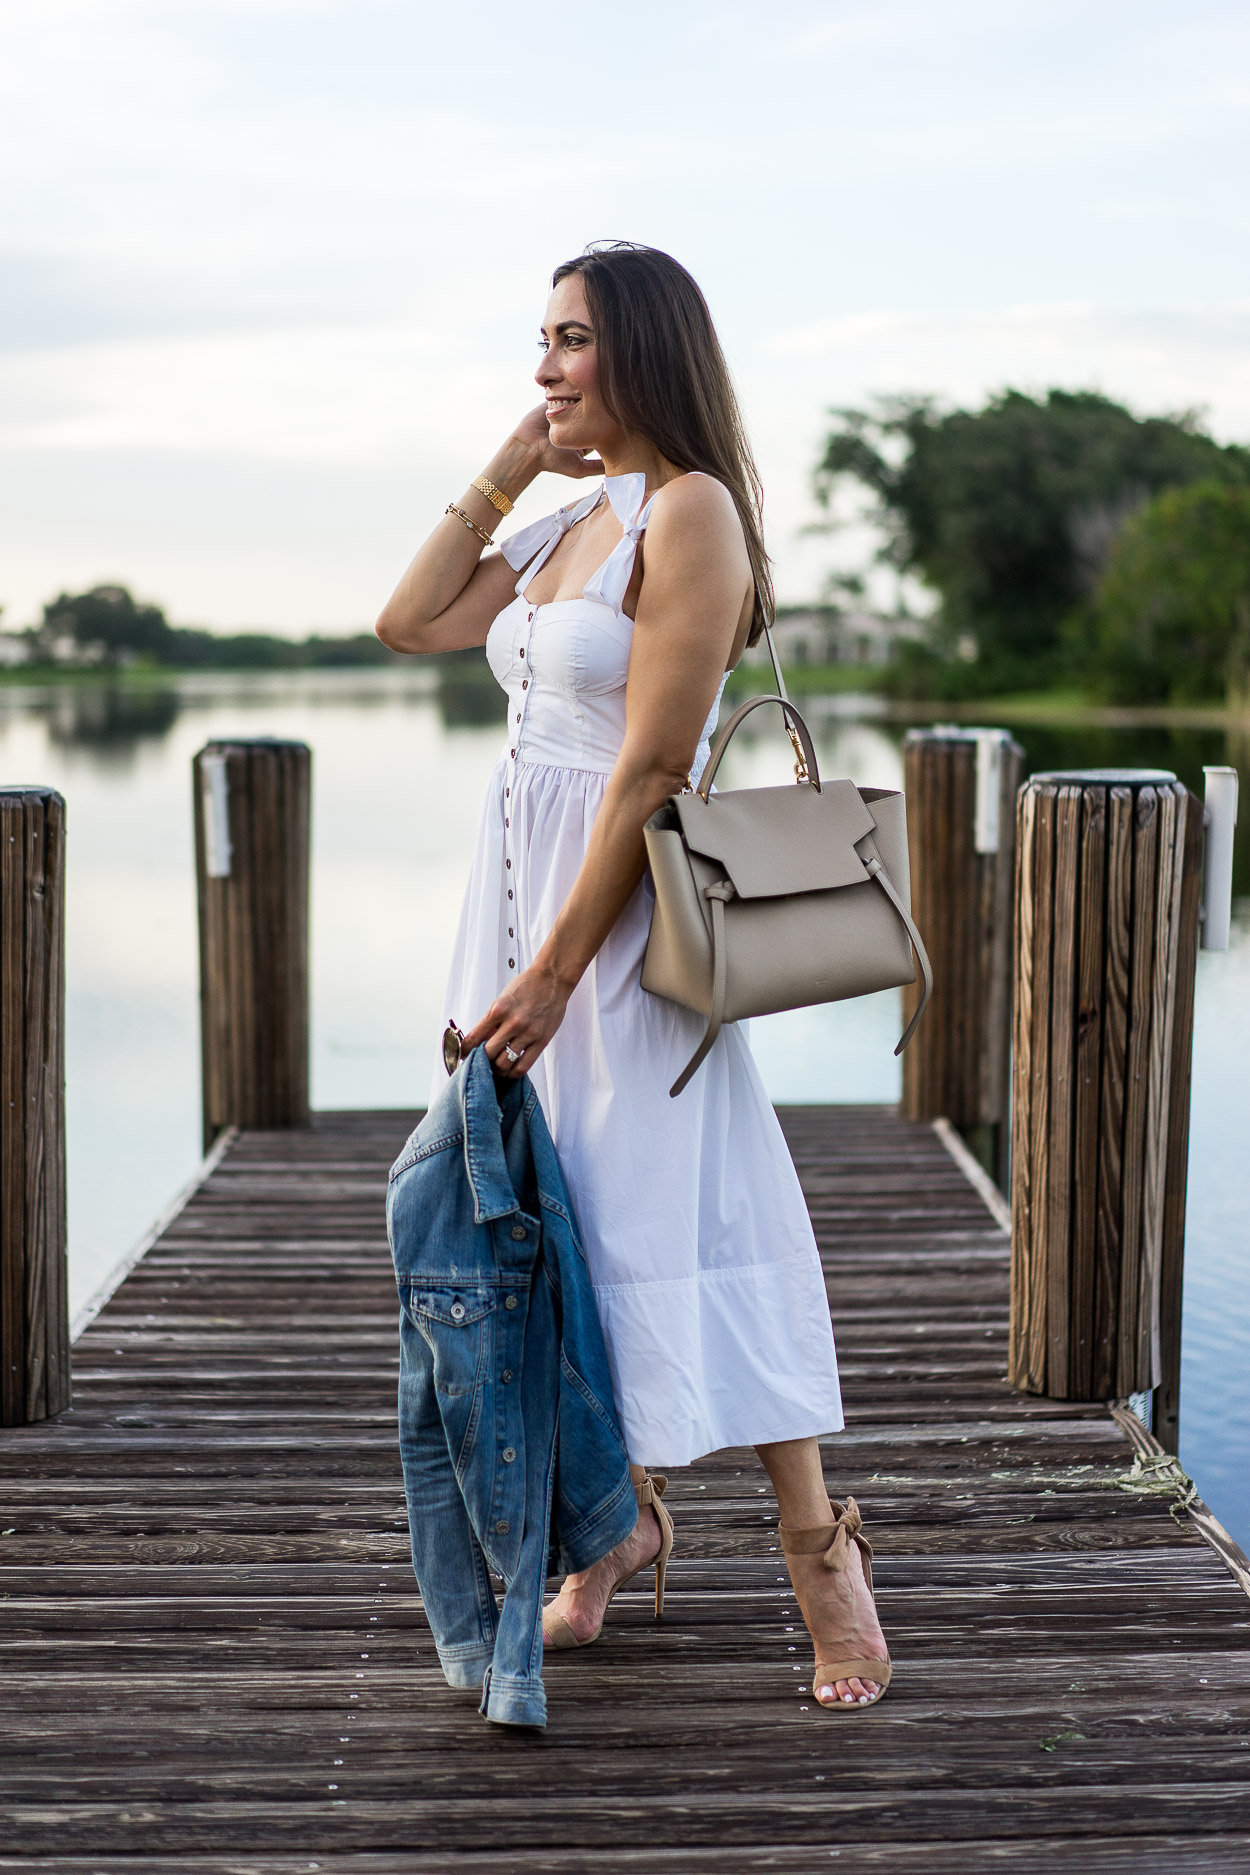 Classic summer white dresses from Chicwish are perfect for days at the lake as worn by A Glam Lifestyle blogger Amanda